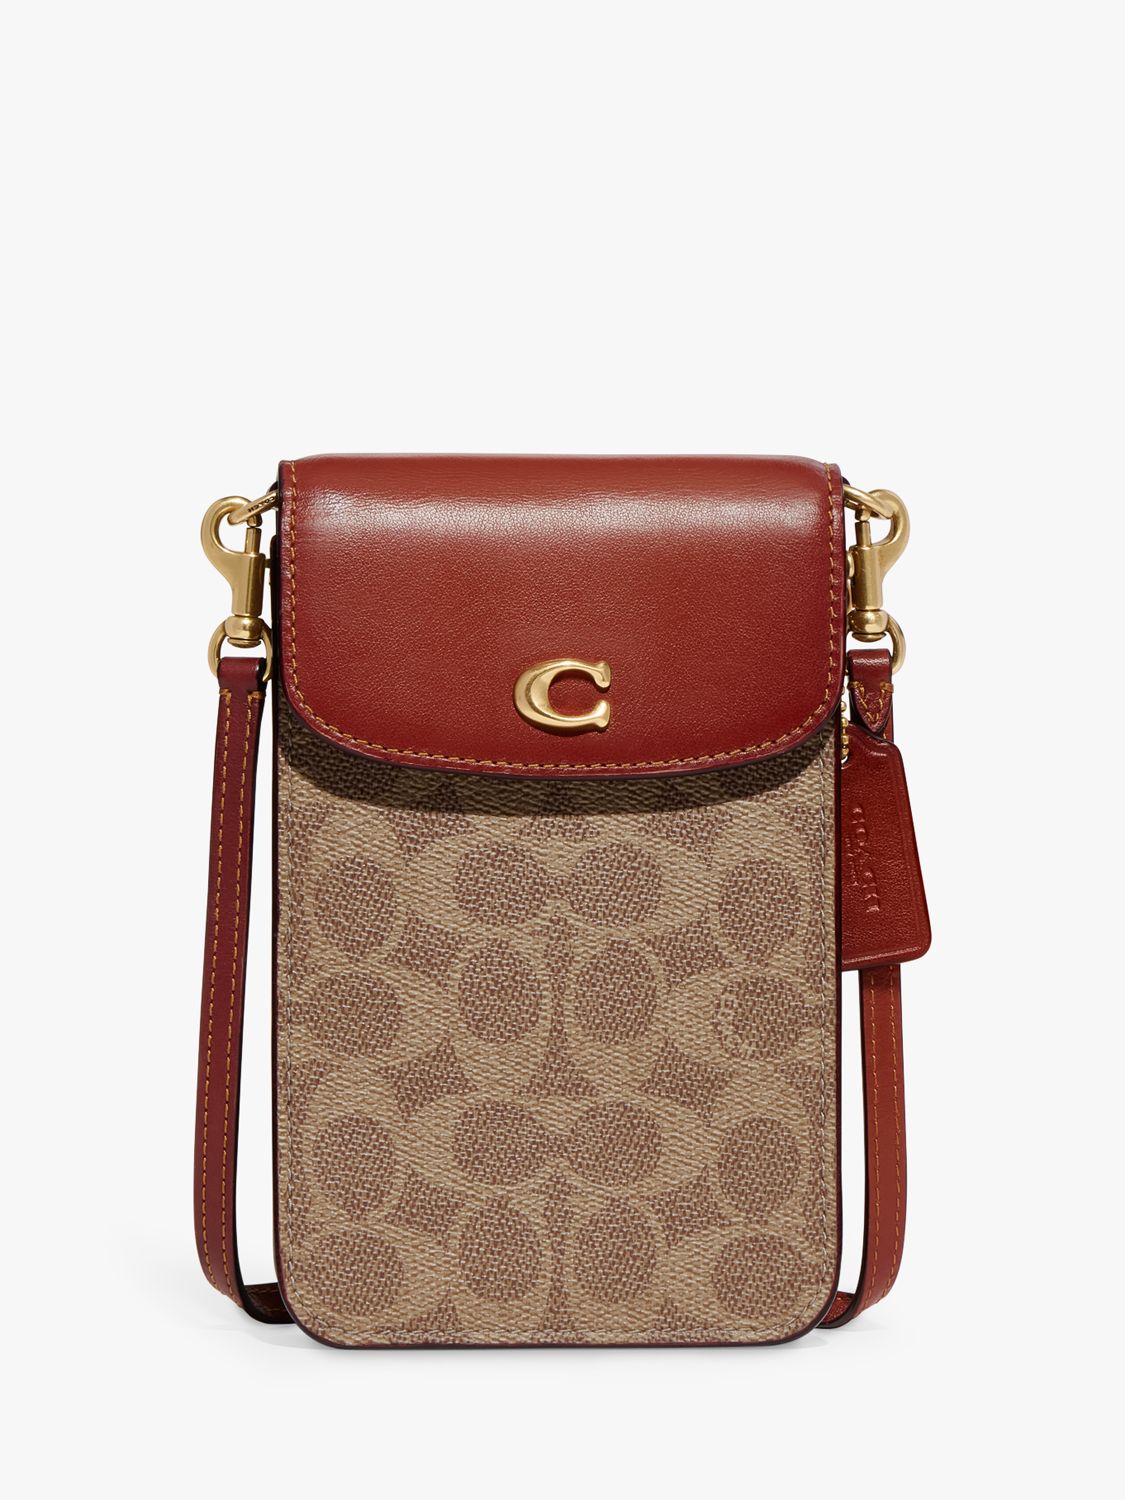 Coach Baby Bag In Signature Canvas In Brass/tan/rust